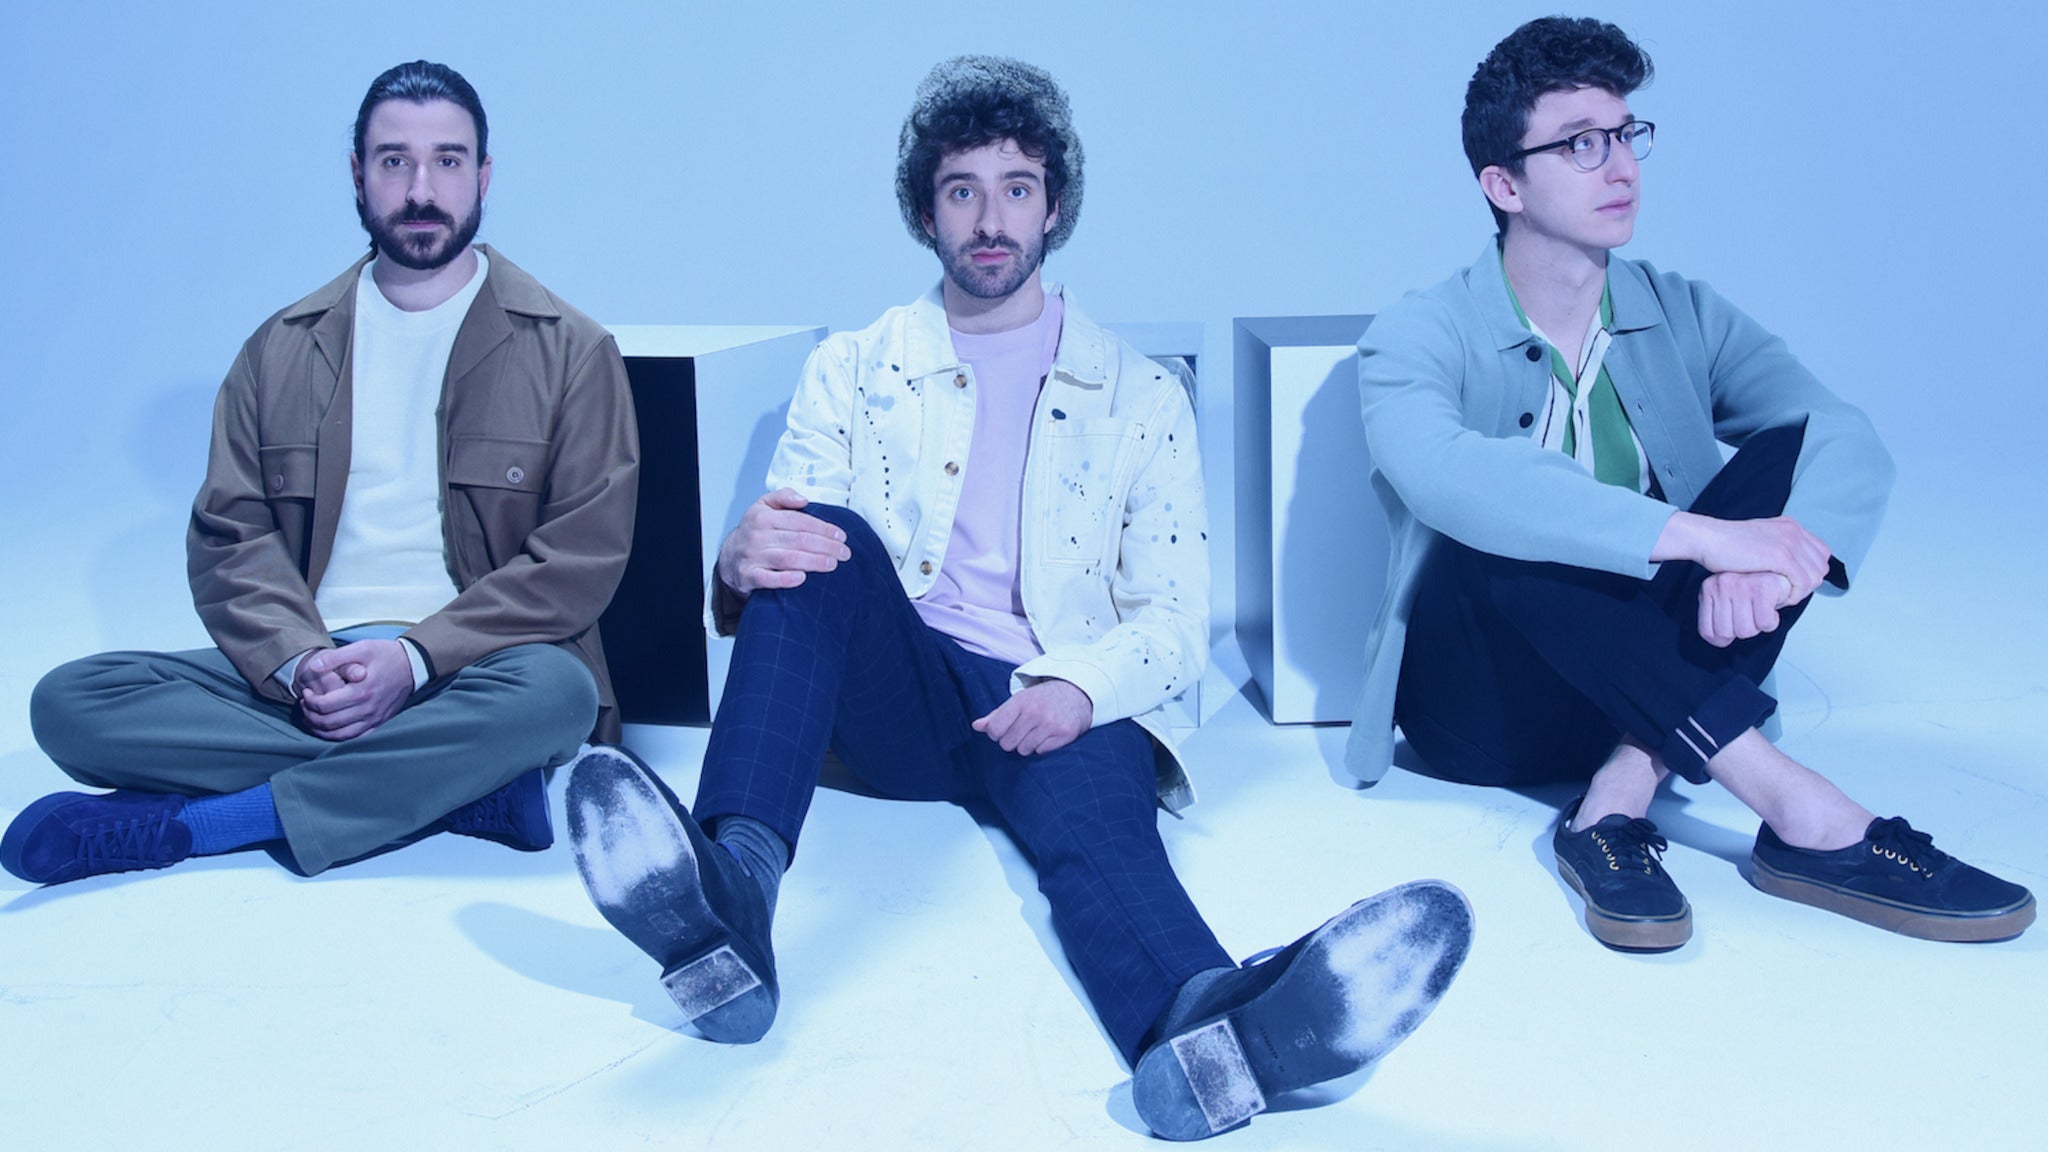 AJR at Fiddlers Green Amphitheatre